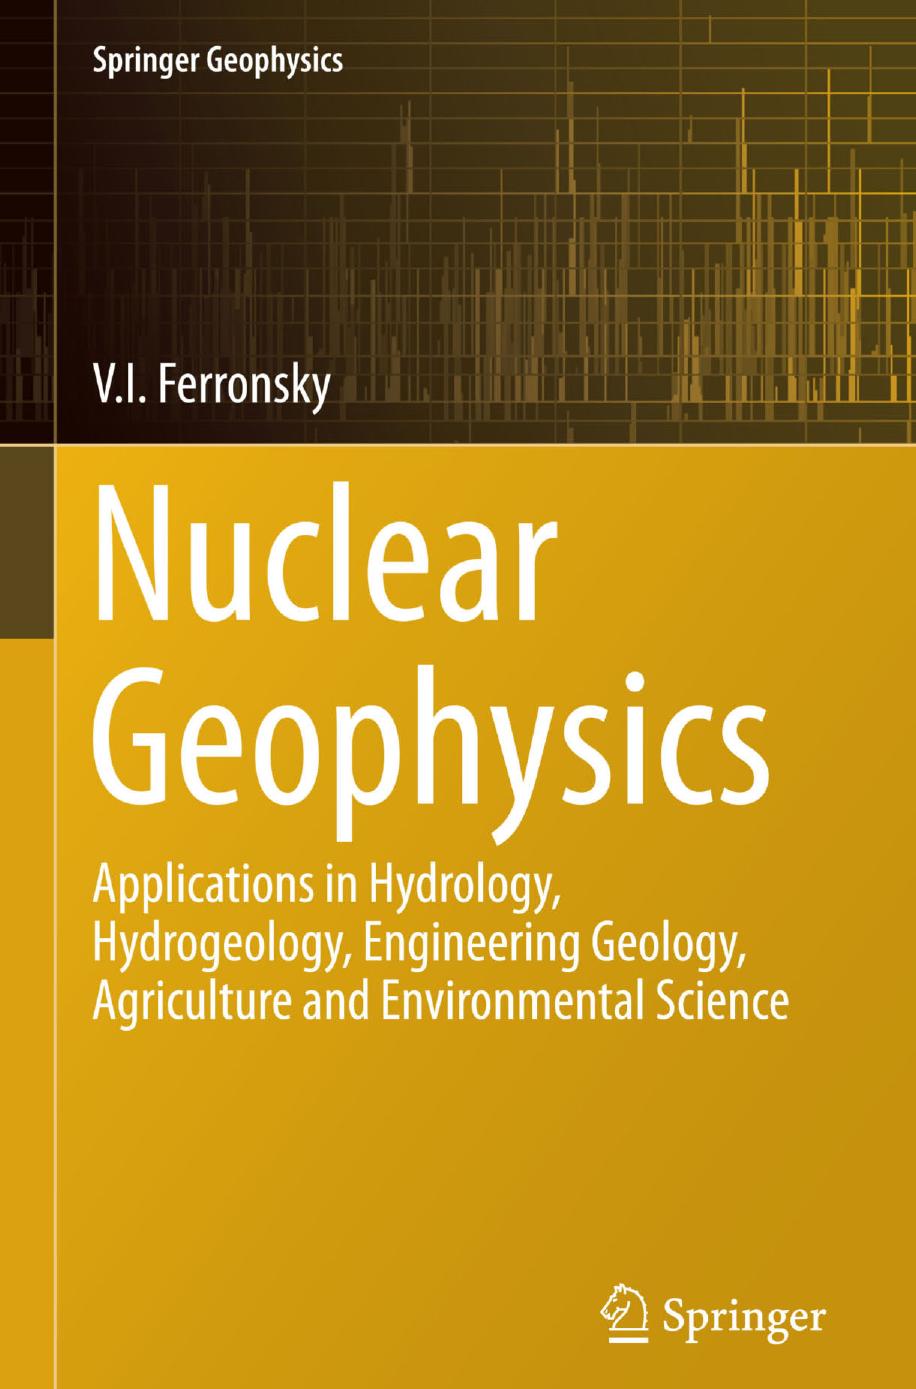 Nuclear Geophysics Applications in Hydrology, Hydrogeology, Engineering Geology, Agriculture and Environmental Science 2015